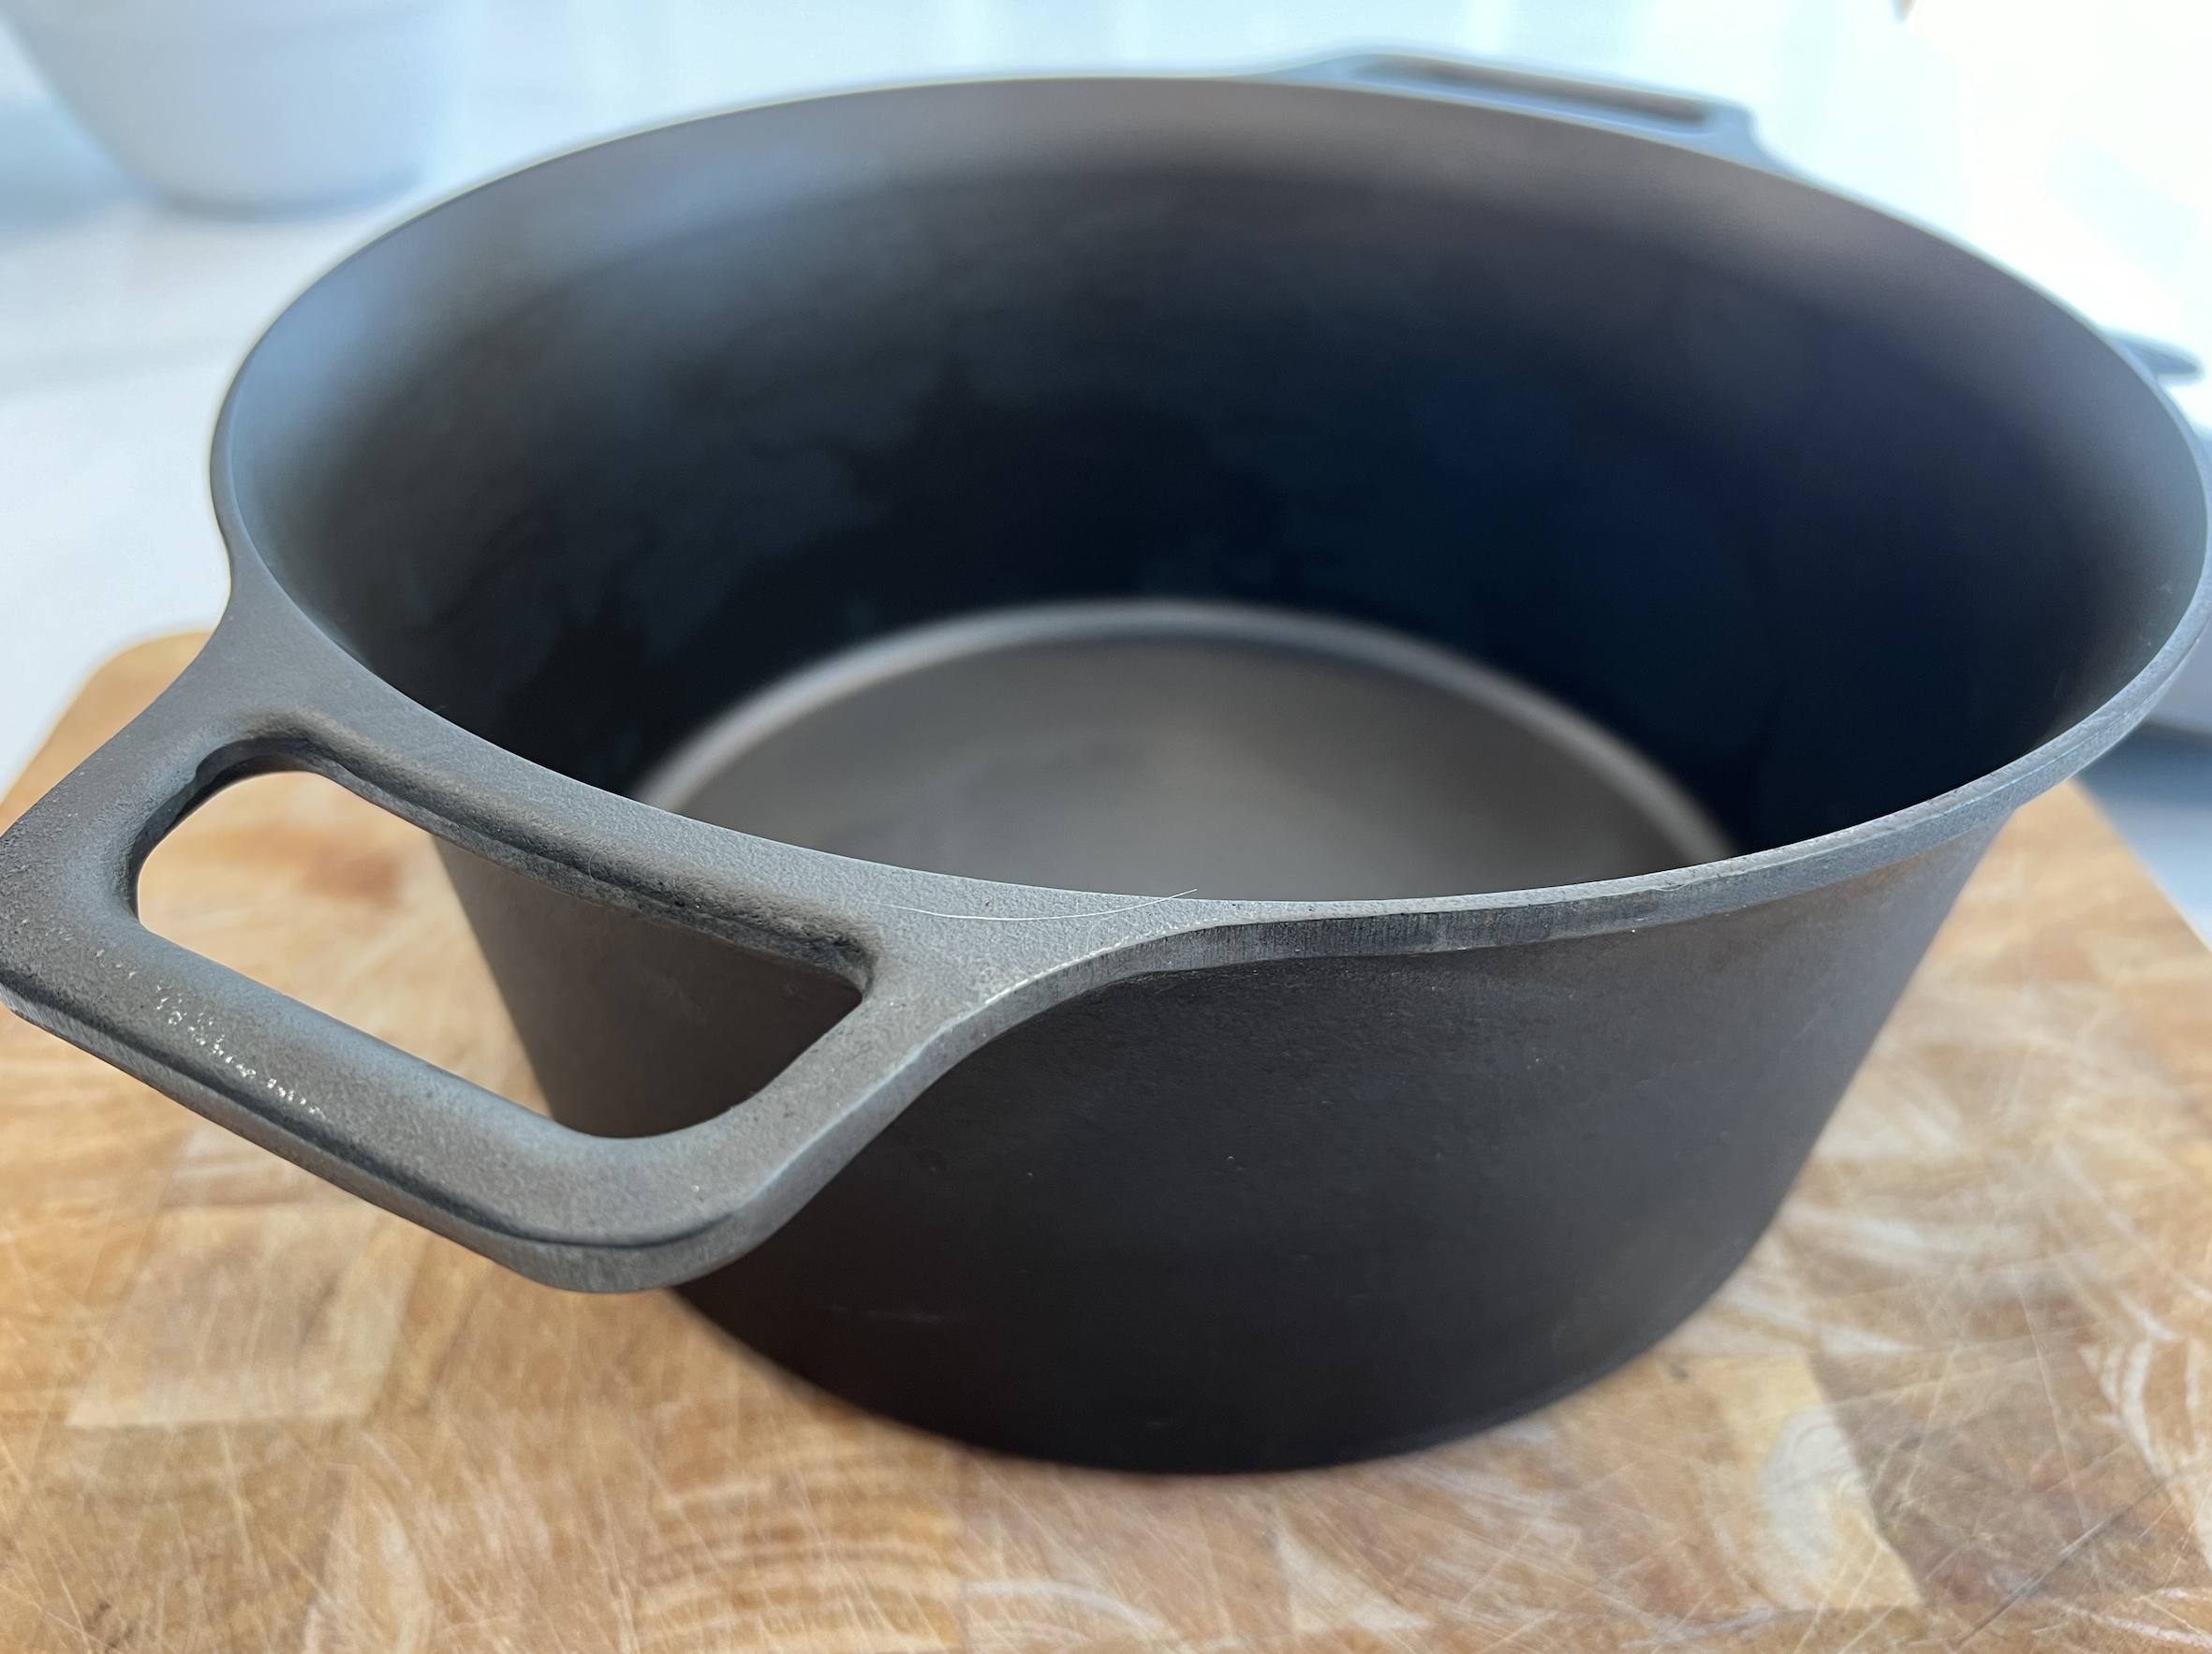 sourdough product review field company dutch oven handmade of cast iron in the united states of america 3